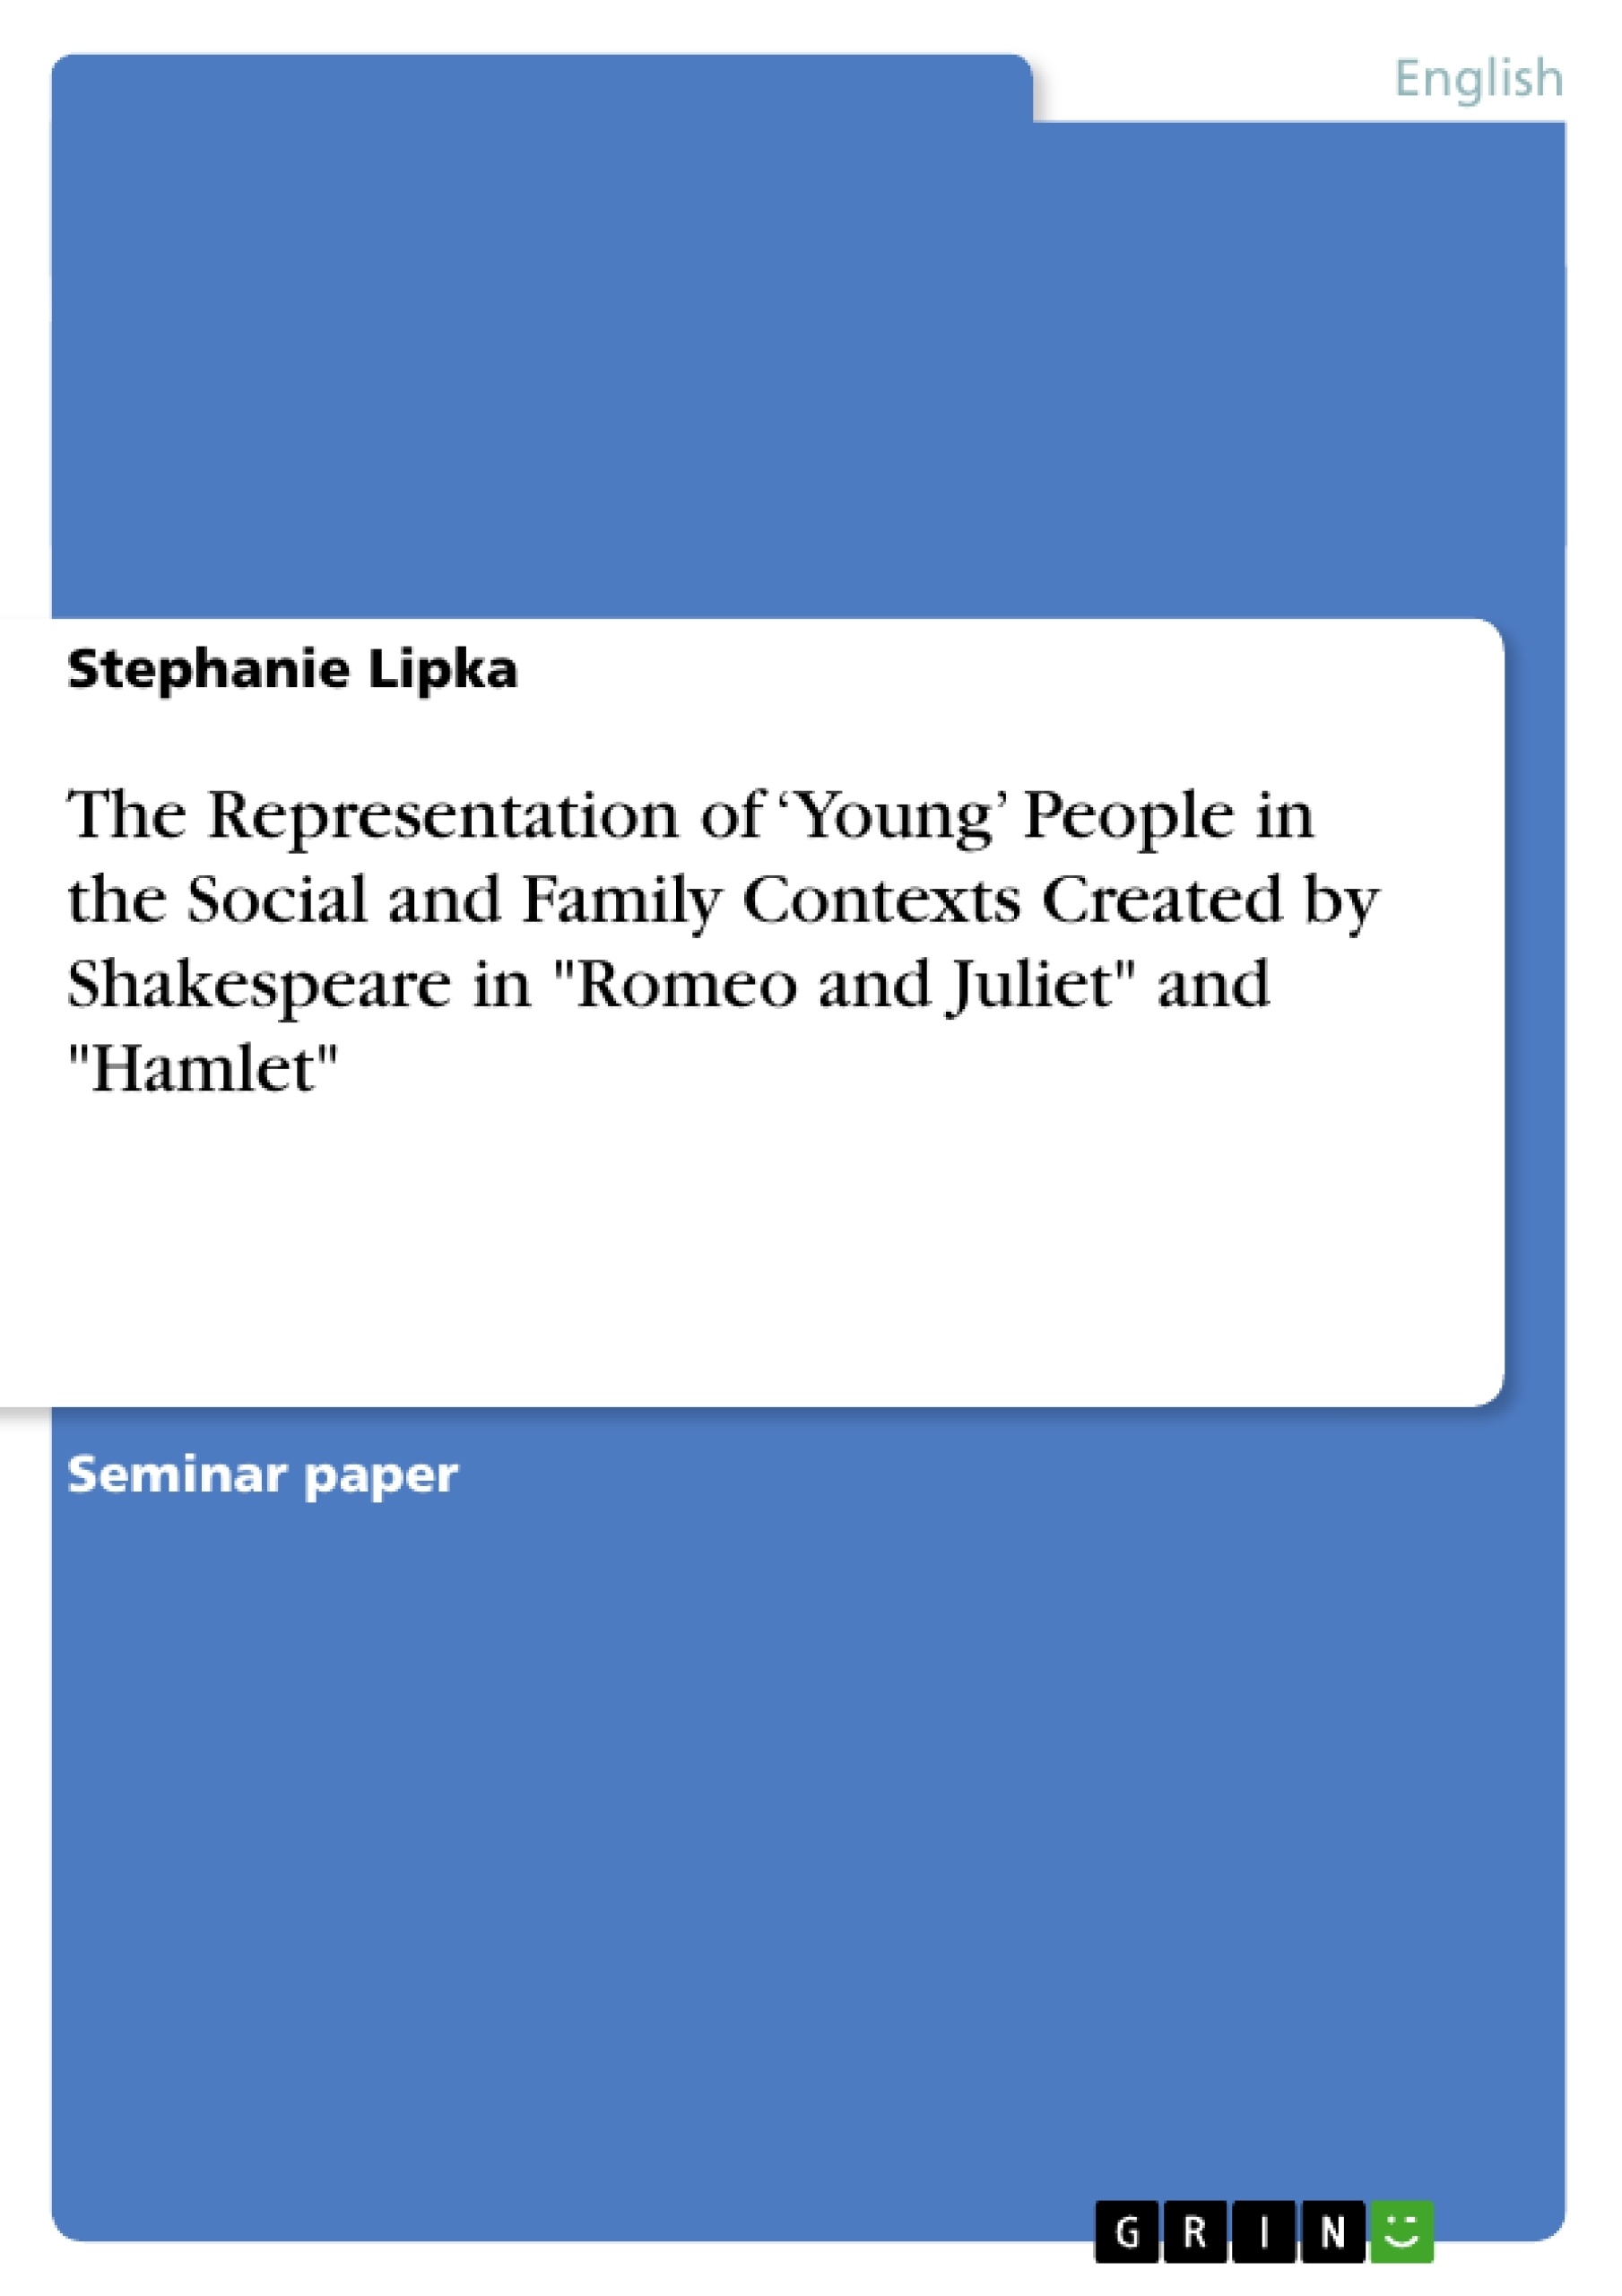 Titre: The Representation of ‘Young’ People in the Social and Family Contexts Created by Shakespeare in "Romeo and Juliet" and "Hamlet"    